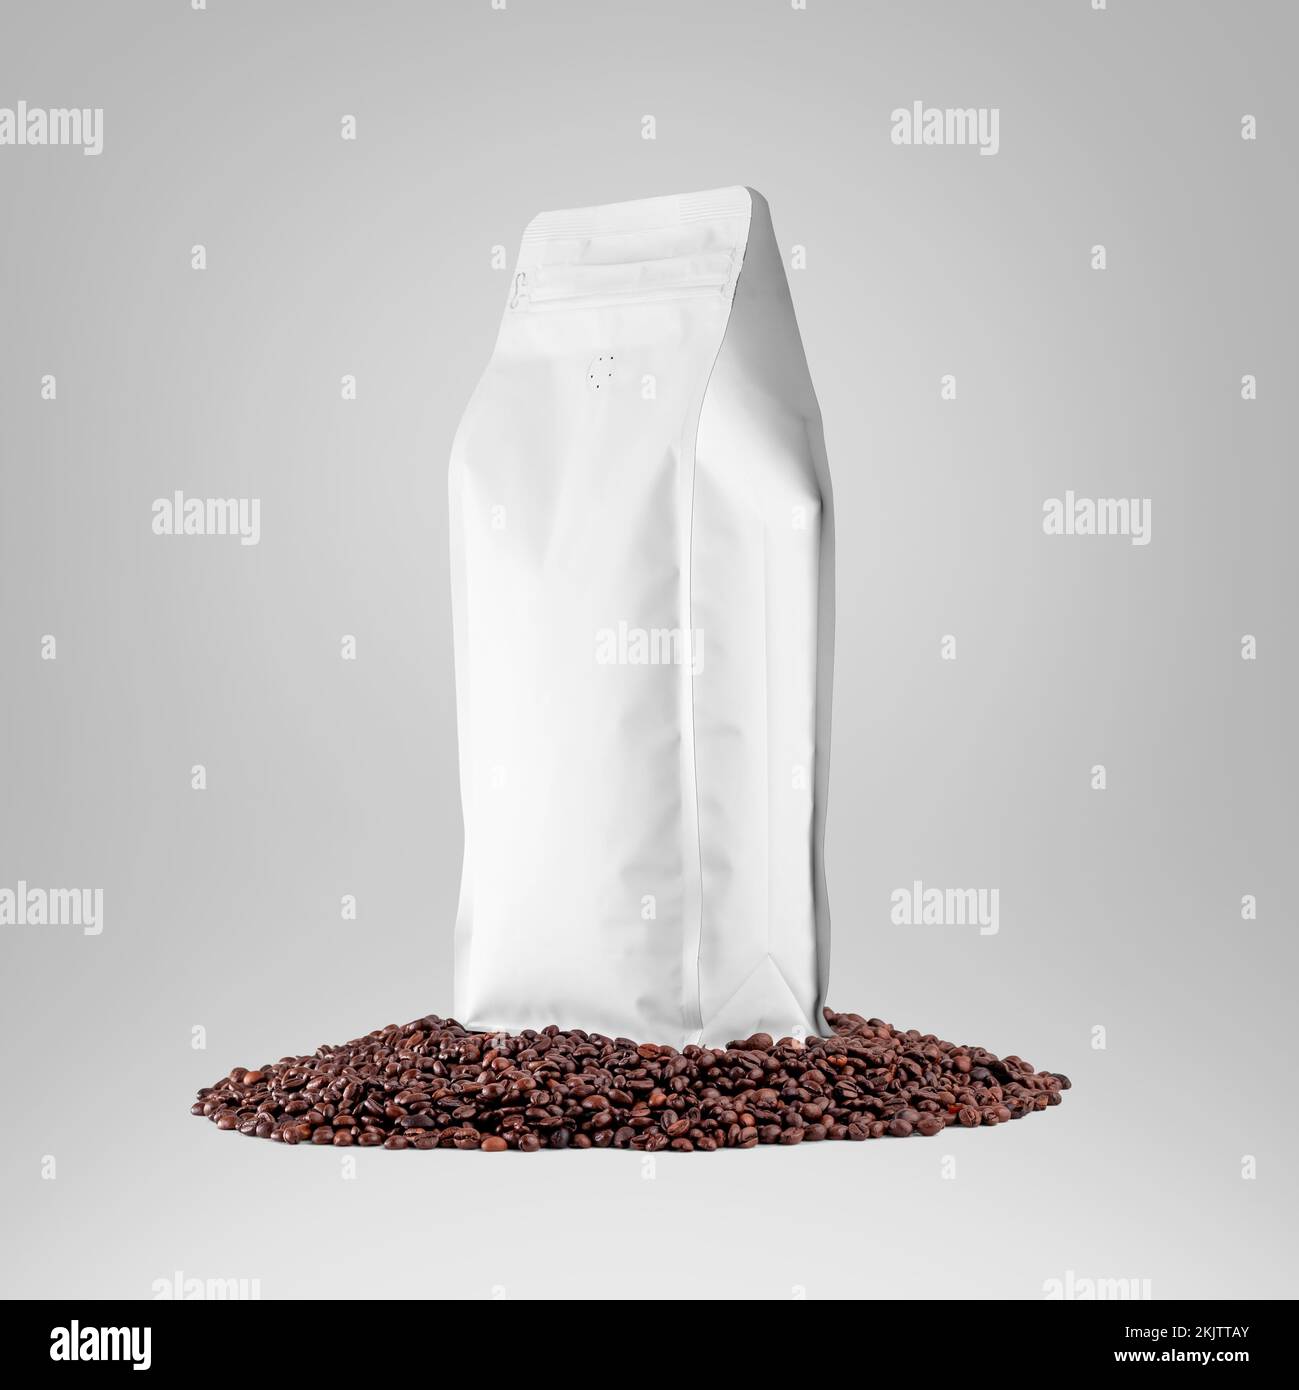 Mockup of a white bag standing on coffee beans, front view, side view, stabilo coffee pouch, isolated on background, close-up. Package template with d Stock Photo